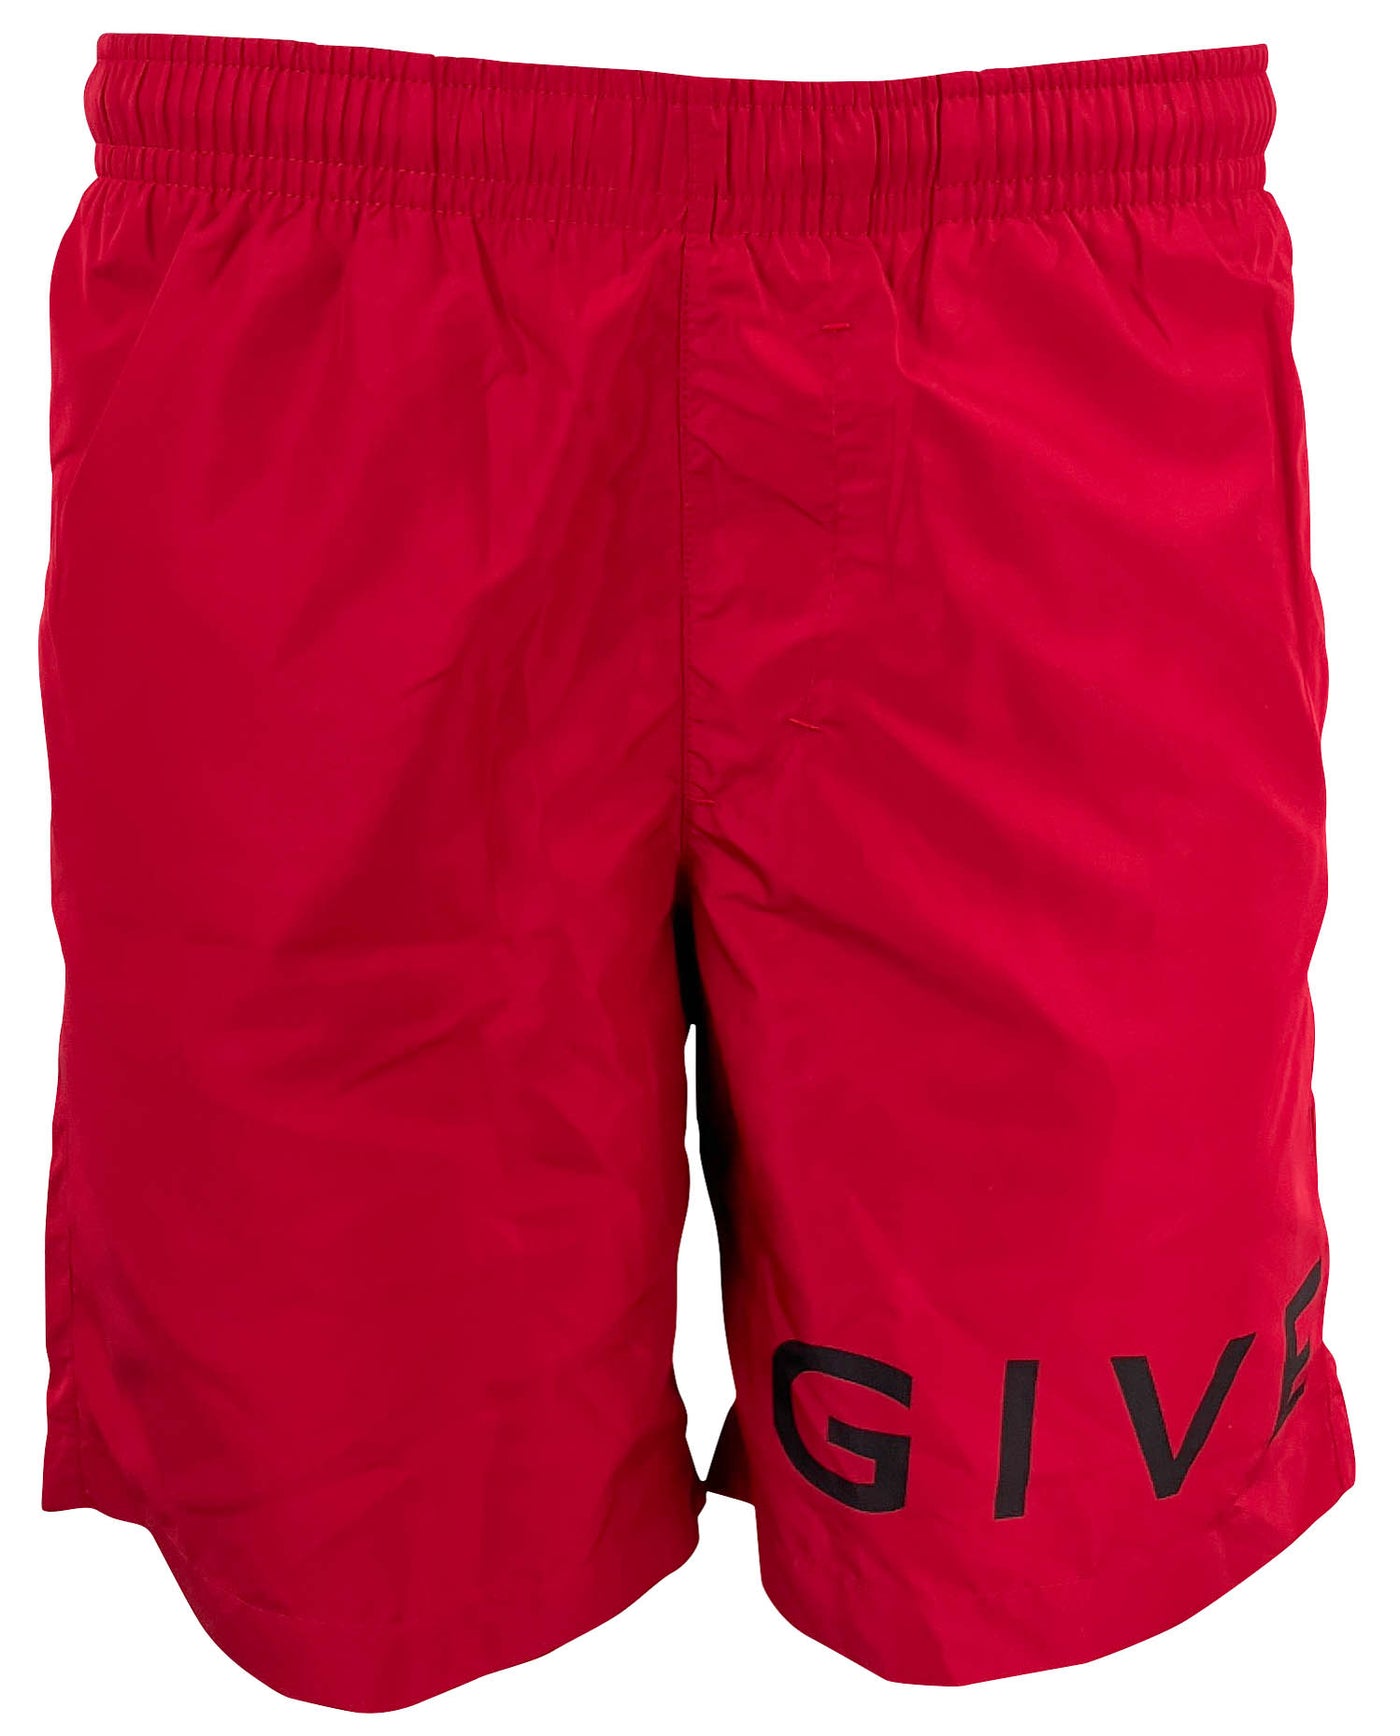 Givenchy Long Swim Shorts in Vermillon - Discounts on Givenchy at UAL